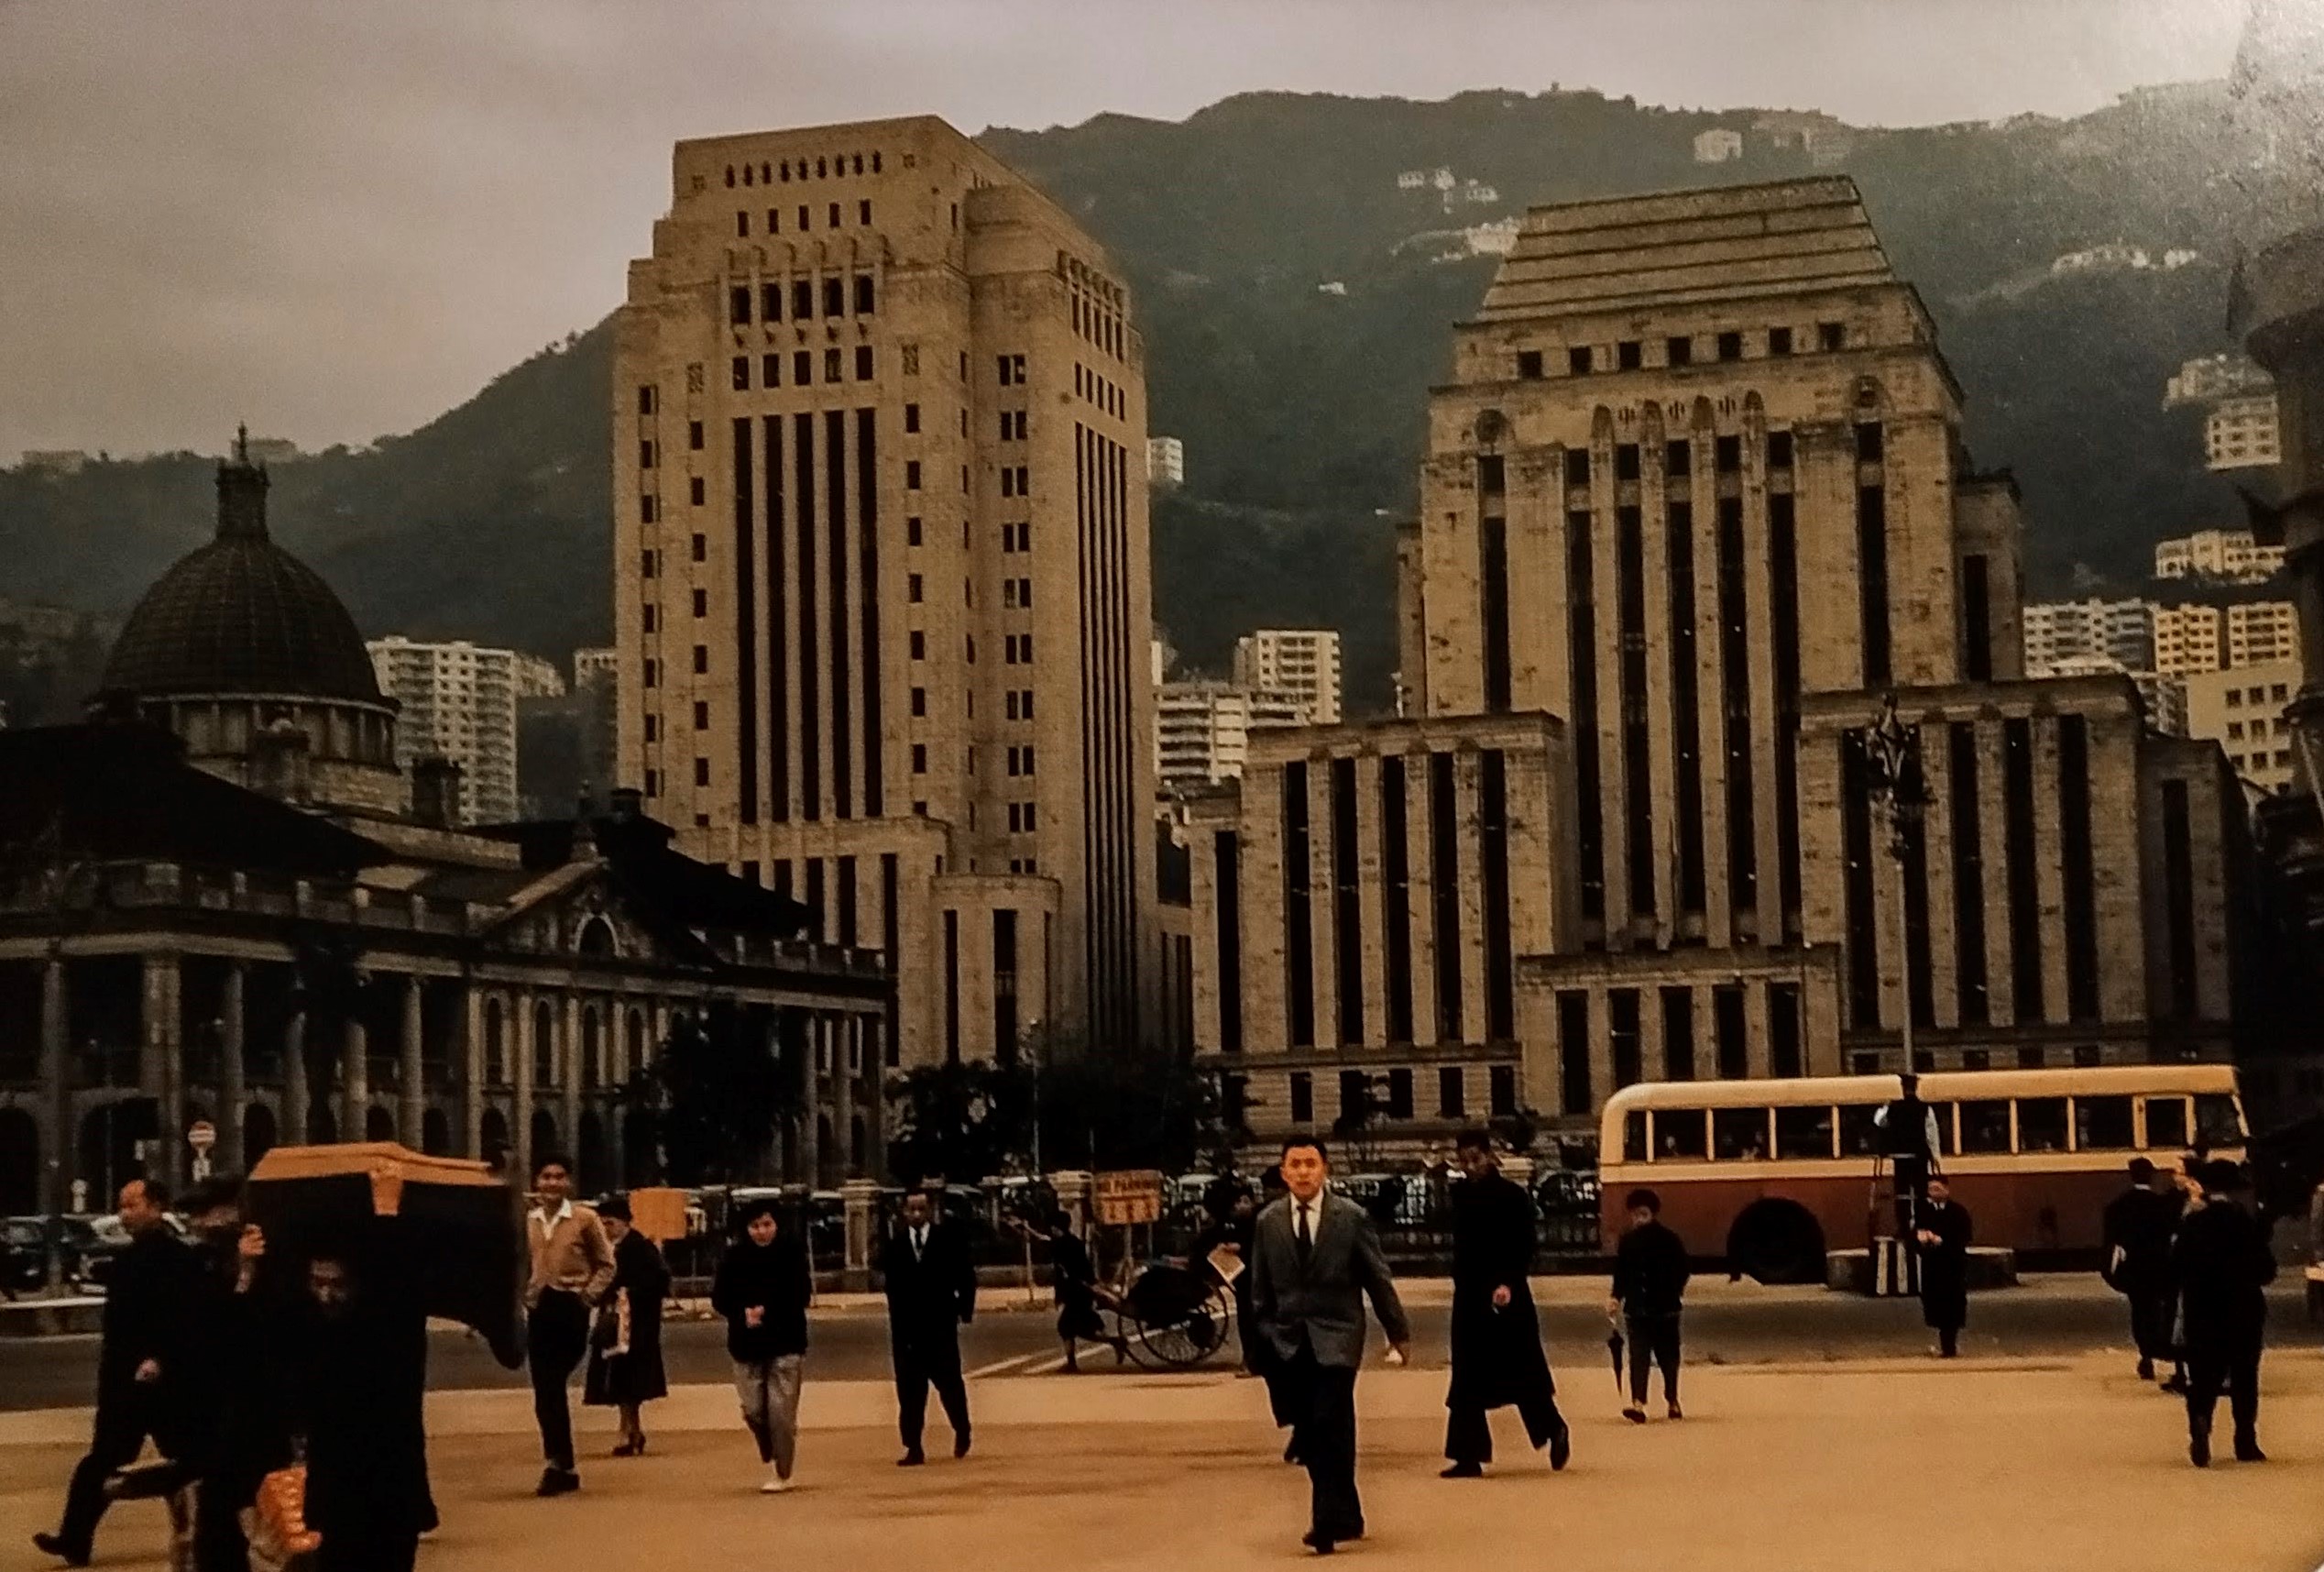 Old photo shows the old Bank of China and old HSBC Main Building.